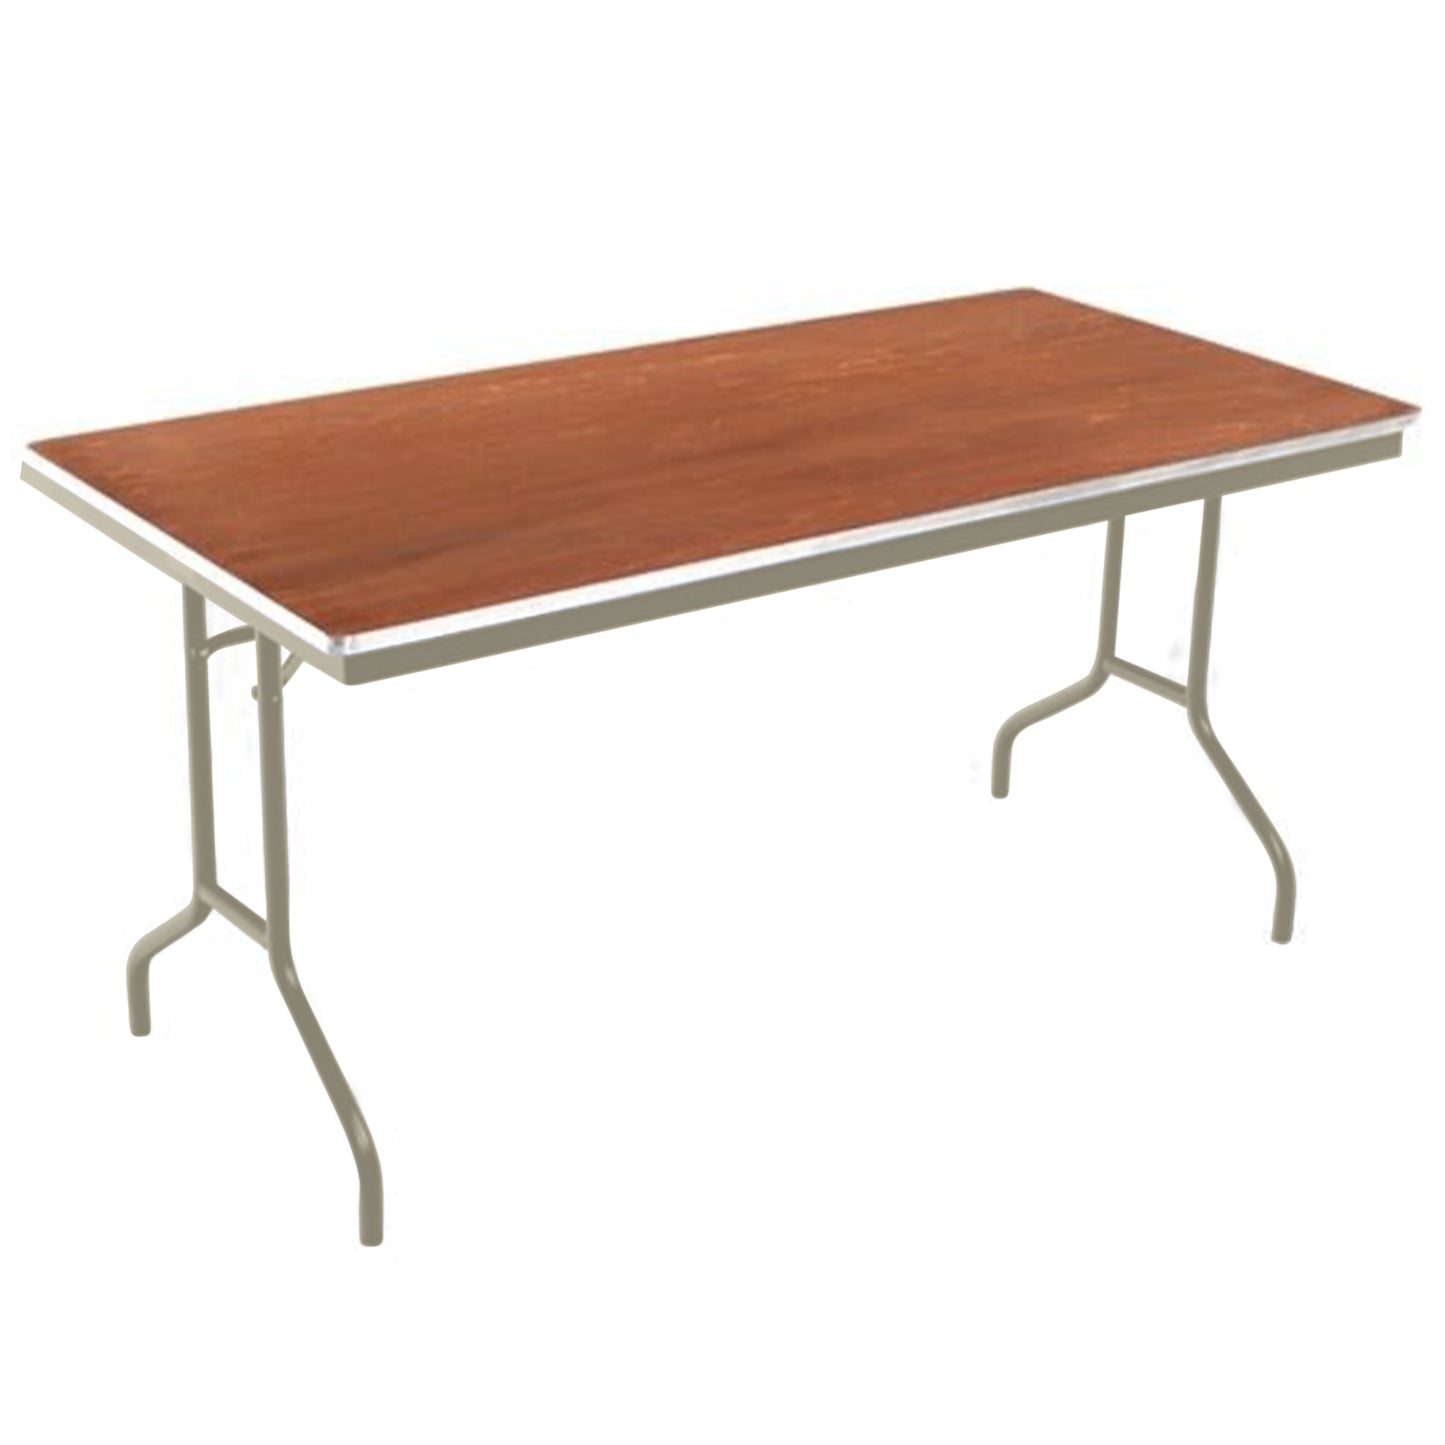 AmTab Folding Table - Plywood Stained and Sealed - Aluminum Edge - 24"W x 60"L x 29"H  (AmTab AMT-245PA)